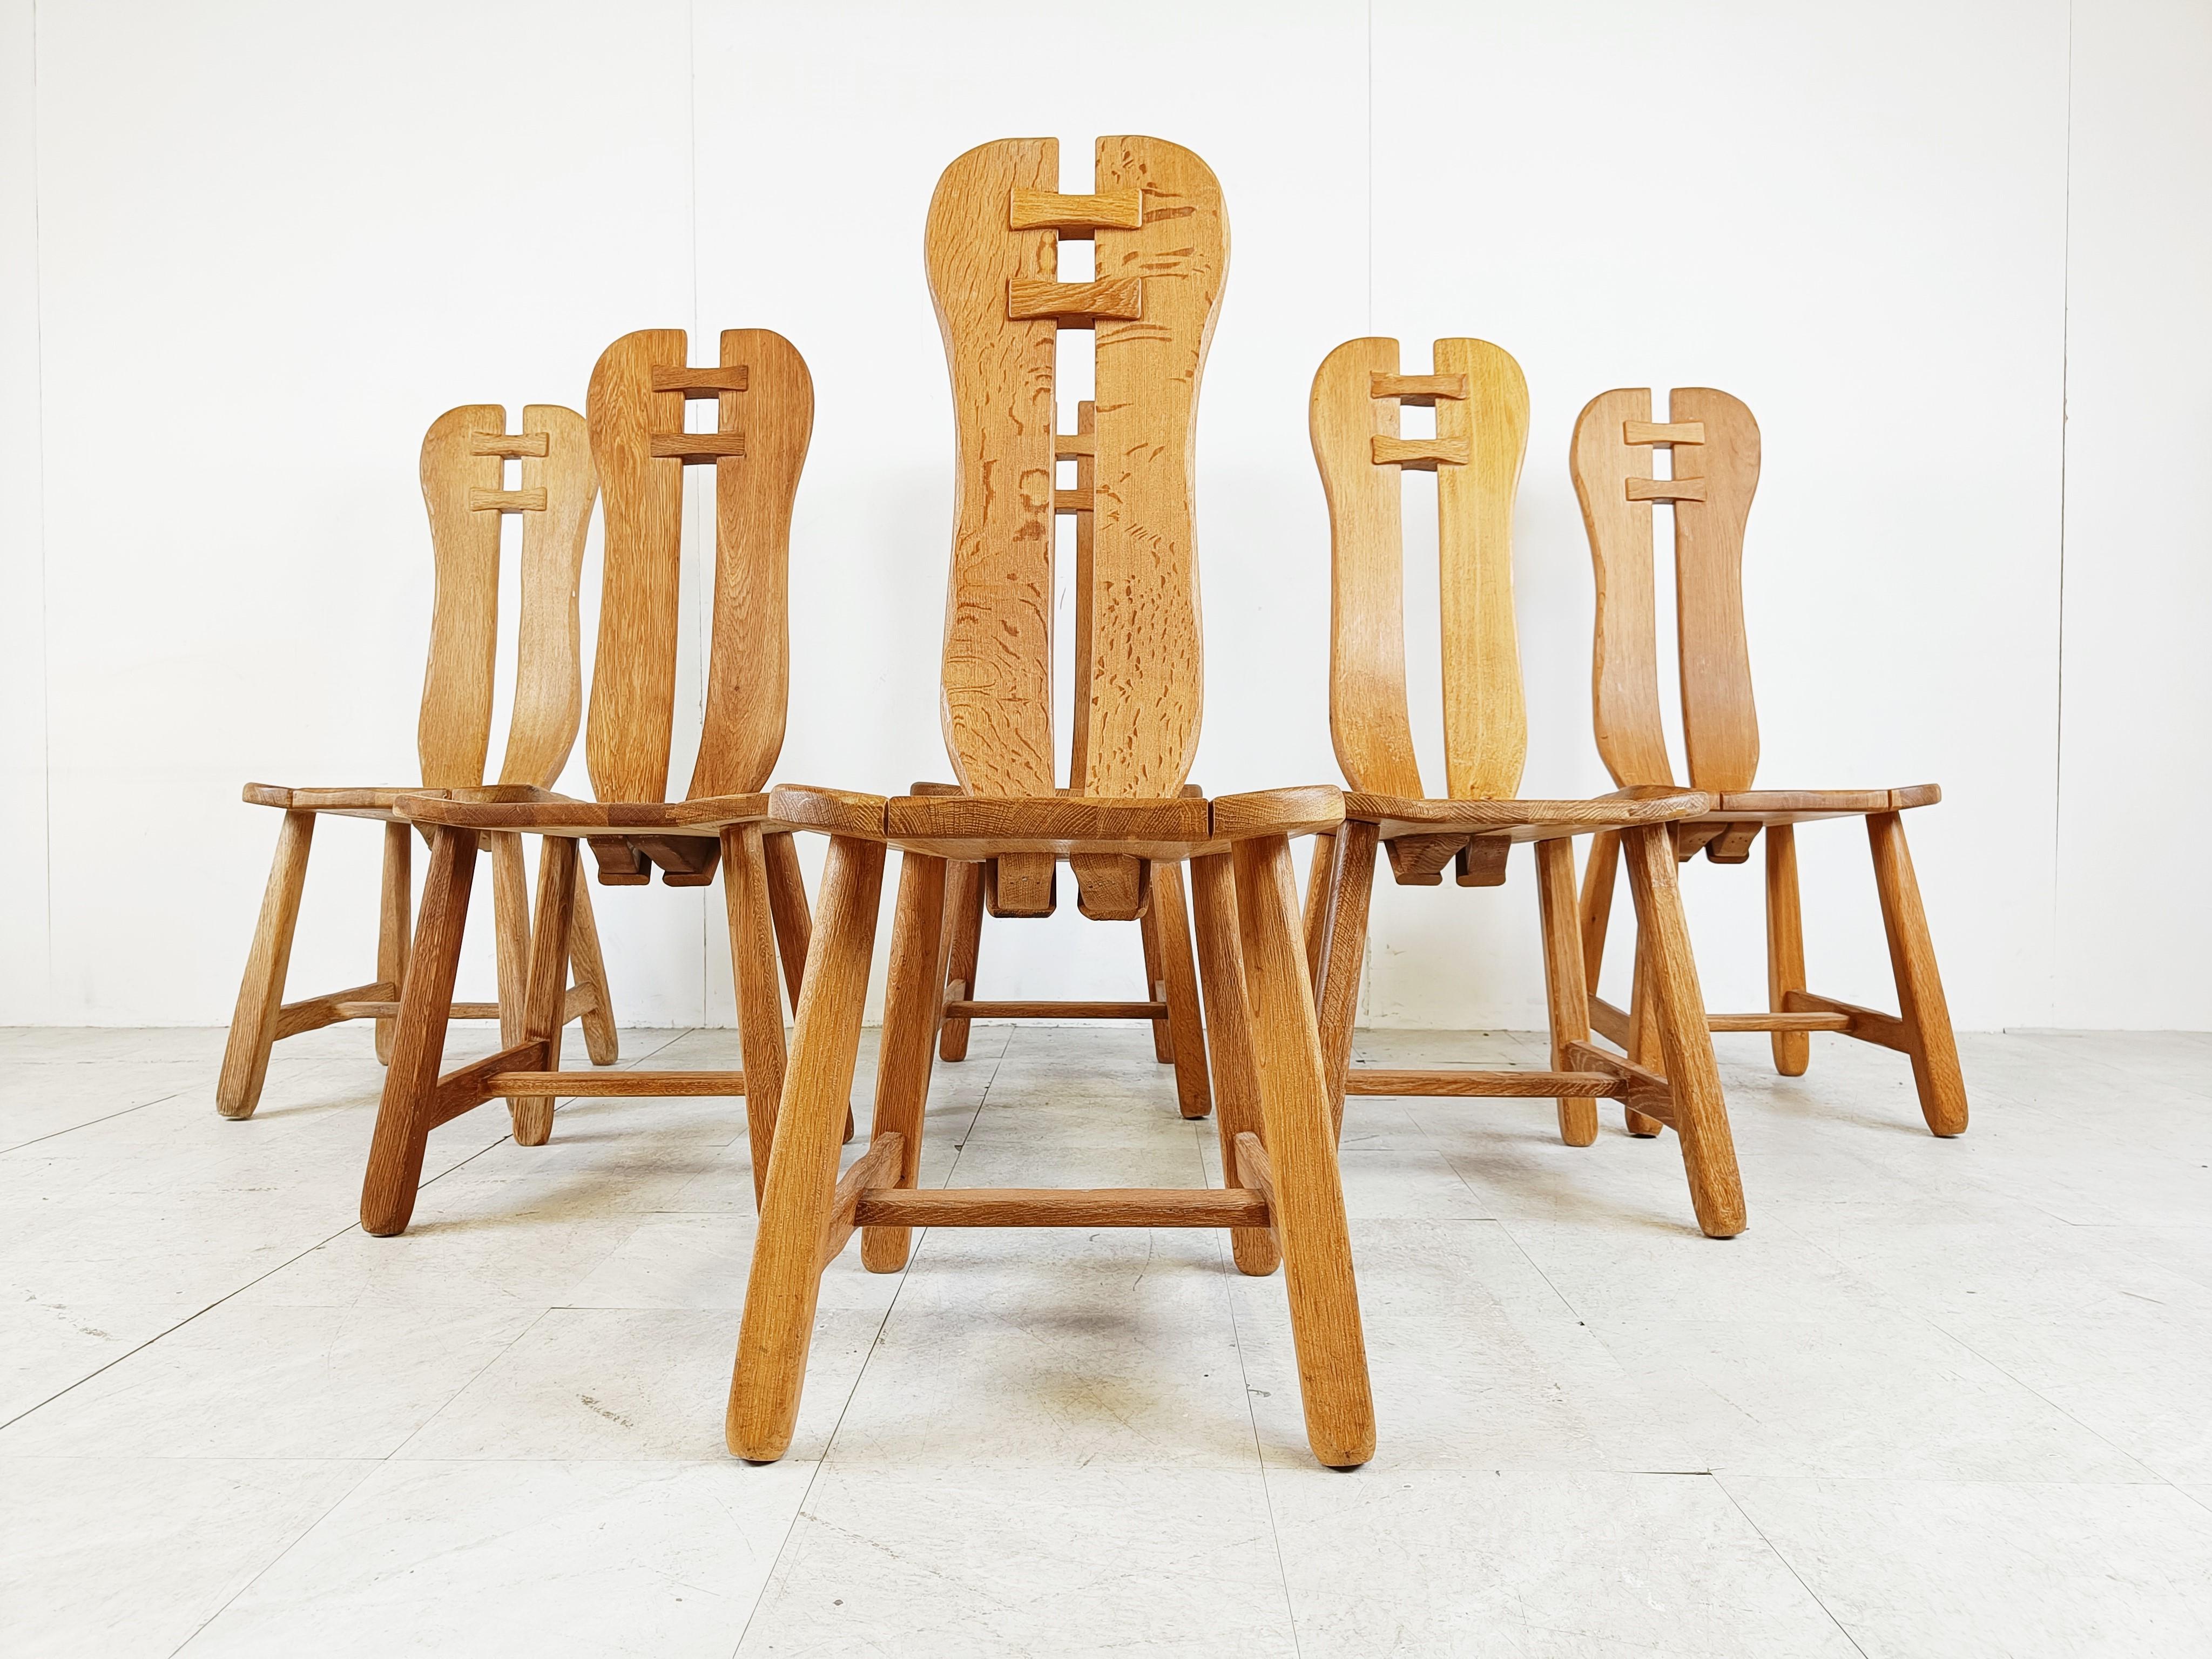 Brutalist Vintage Dining Chairs by Depuydt, Belgium, 1960s For Sale